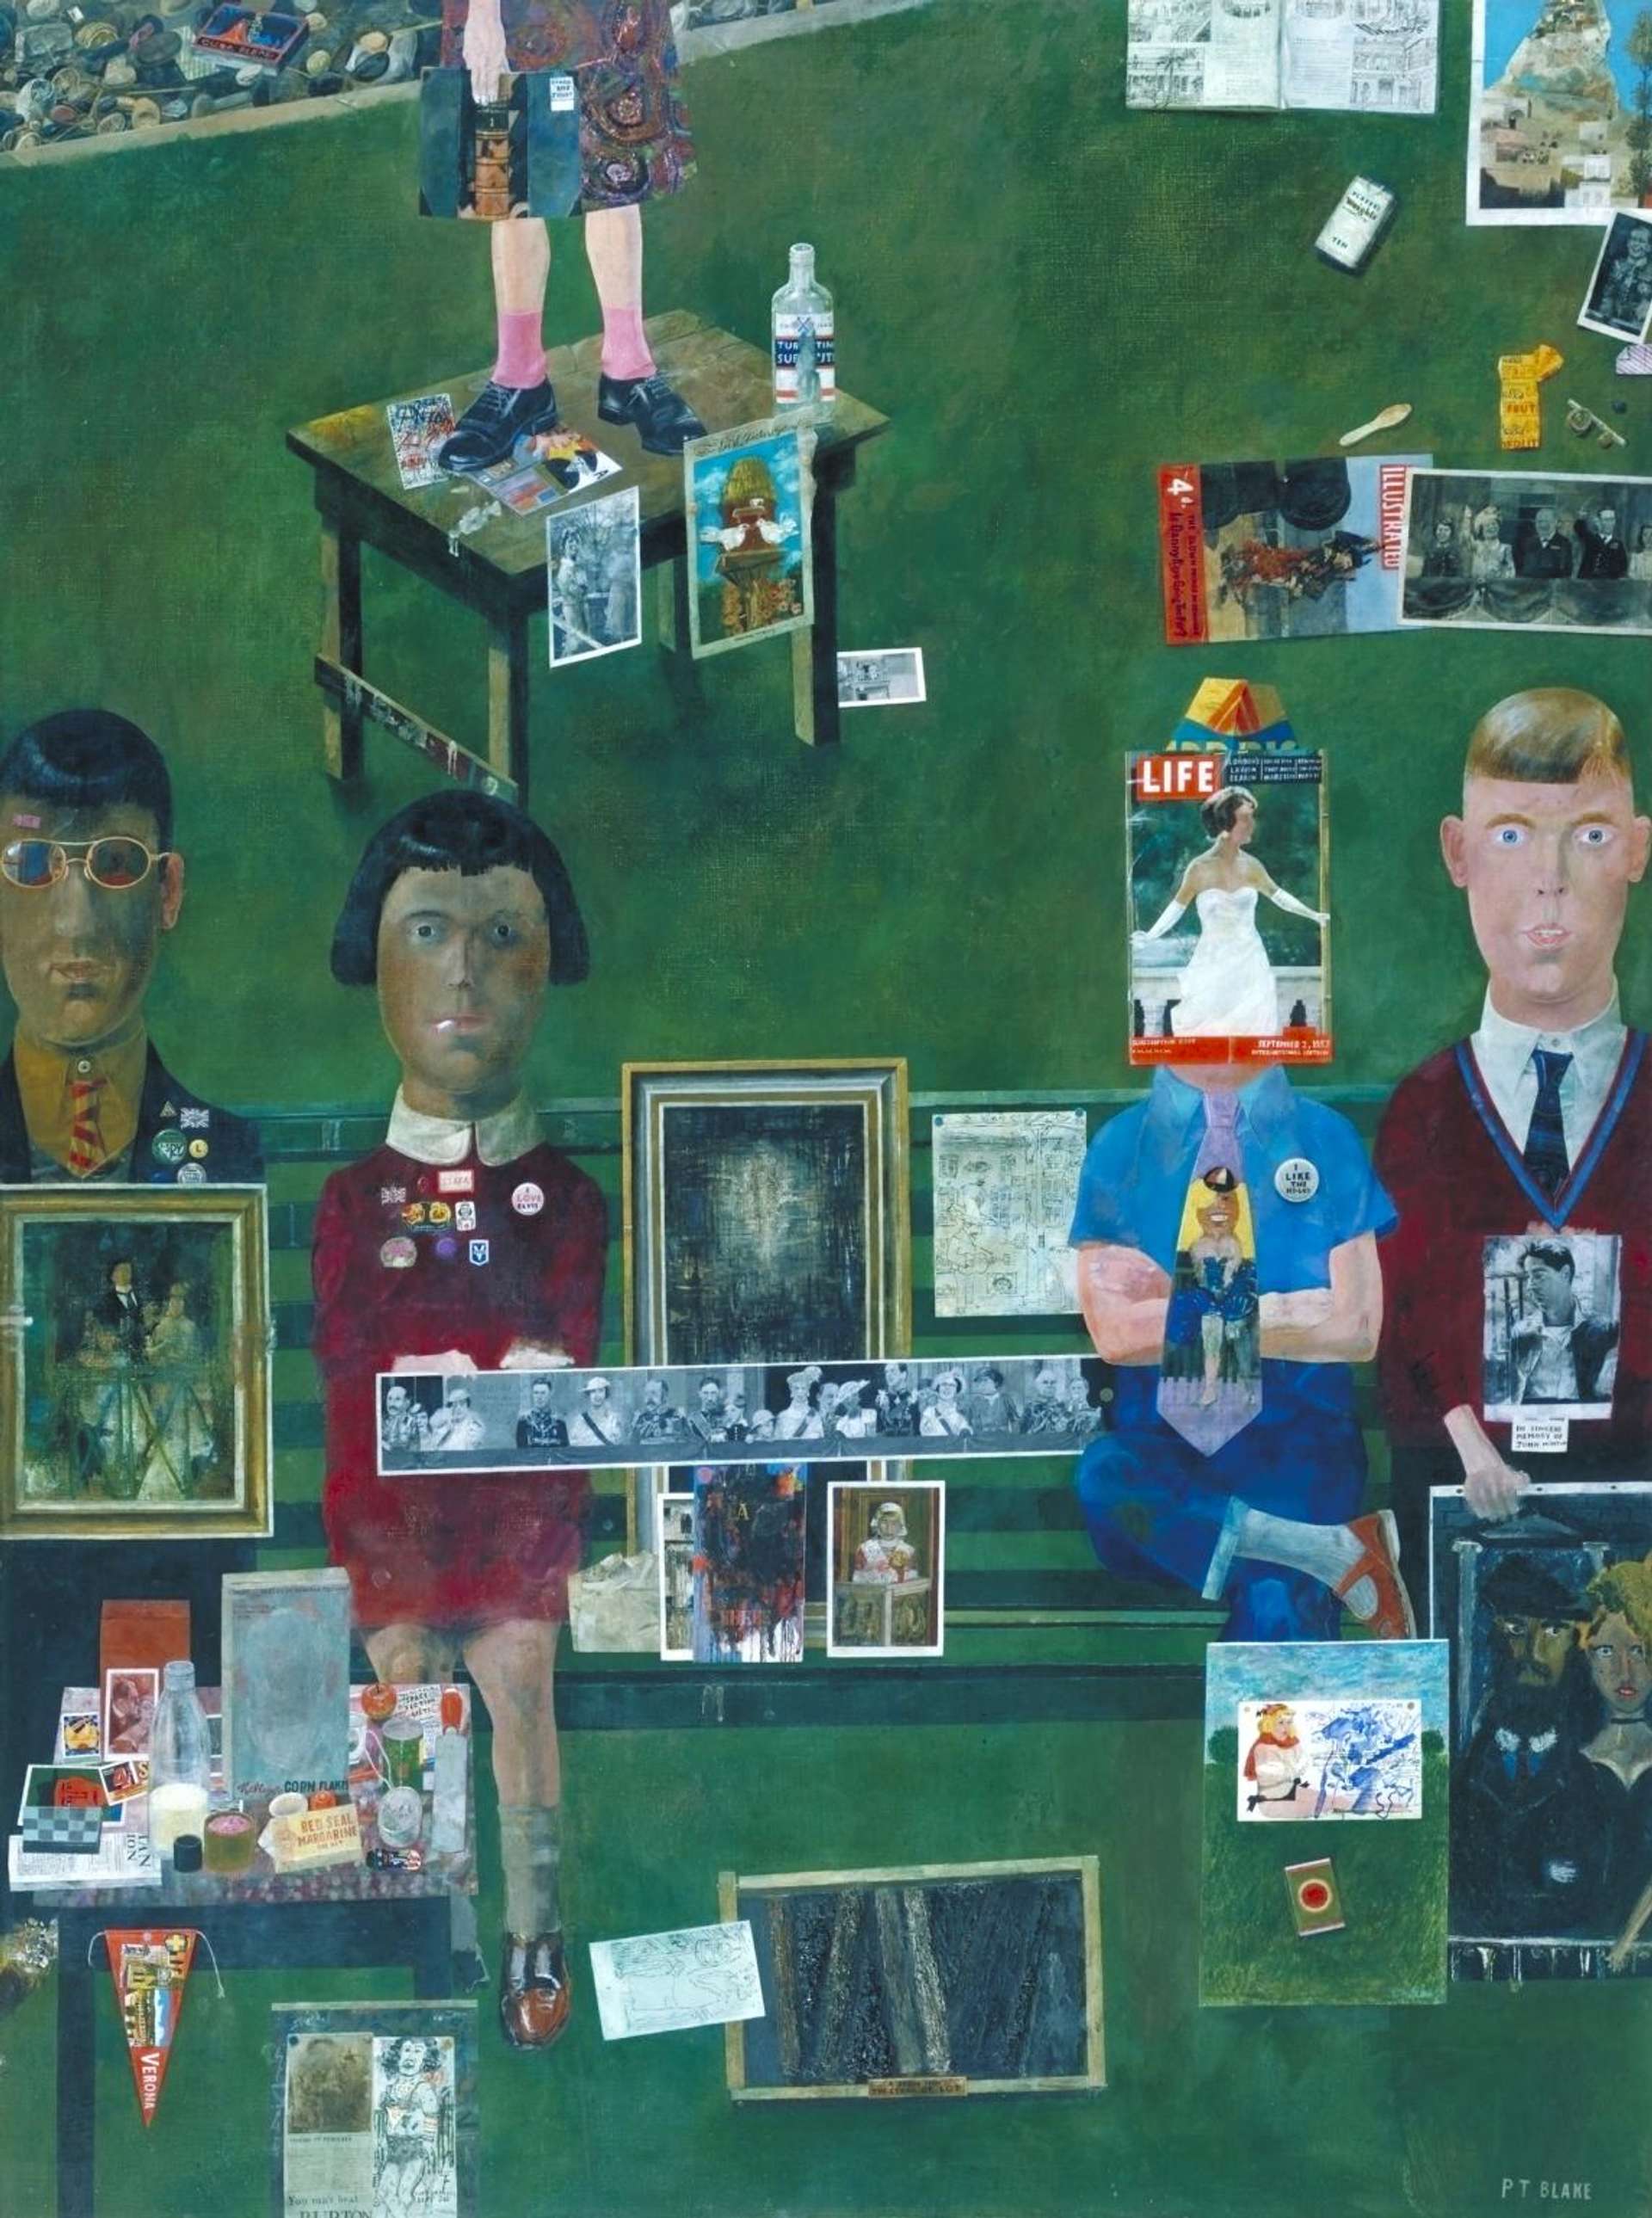 On The Balcony by Peter Blake